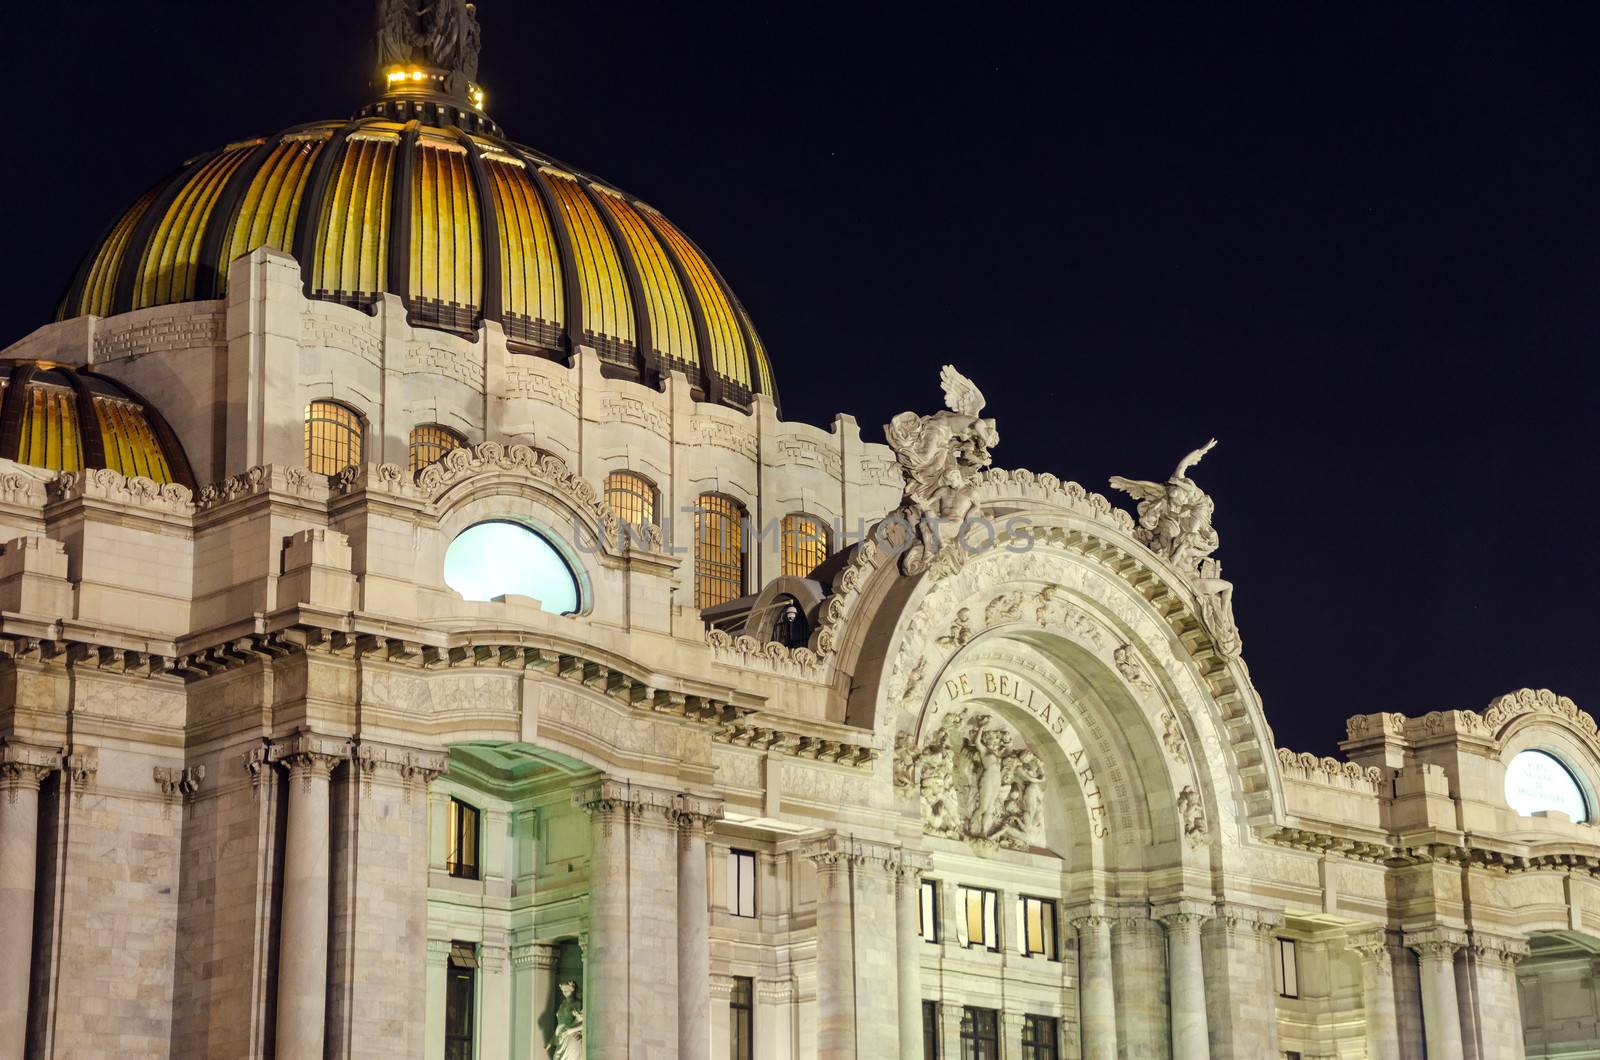 The Fine Arts Palace of Mexico City seen at night